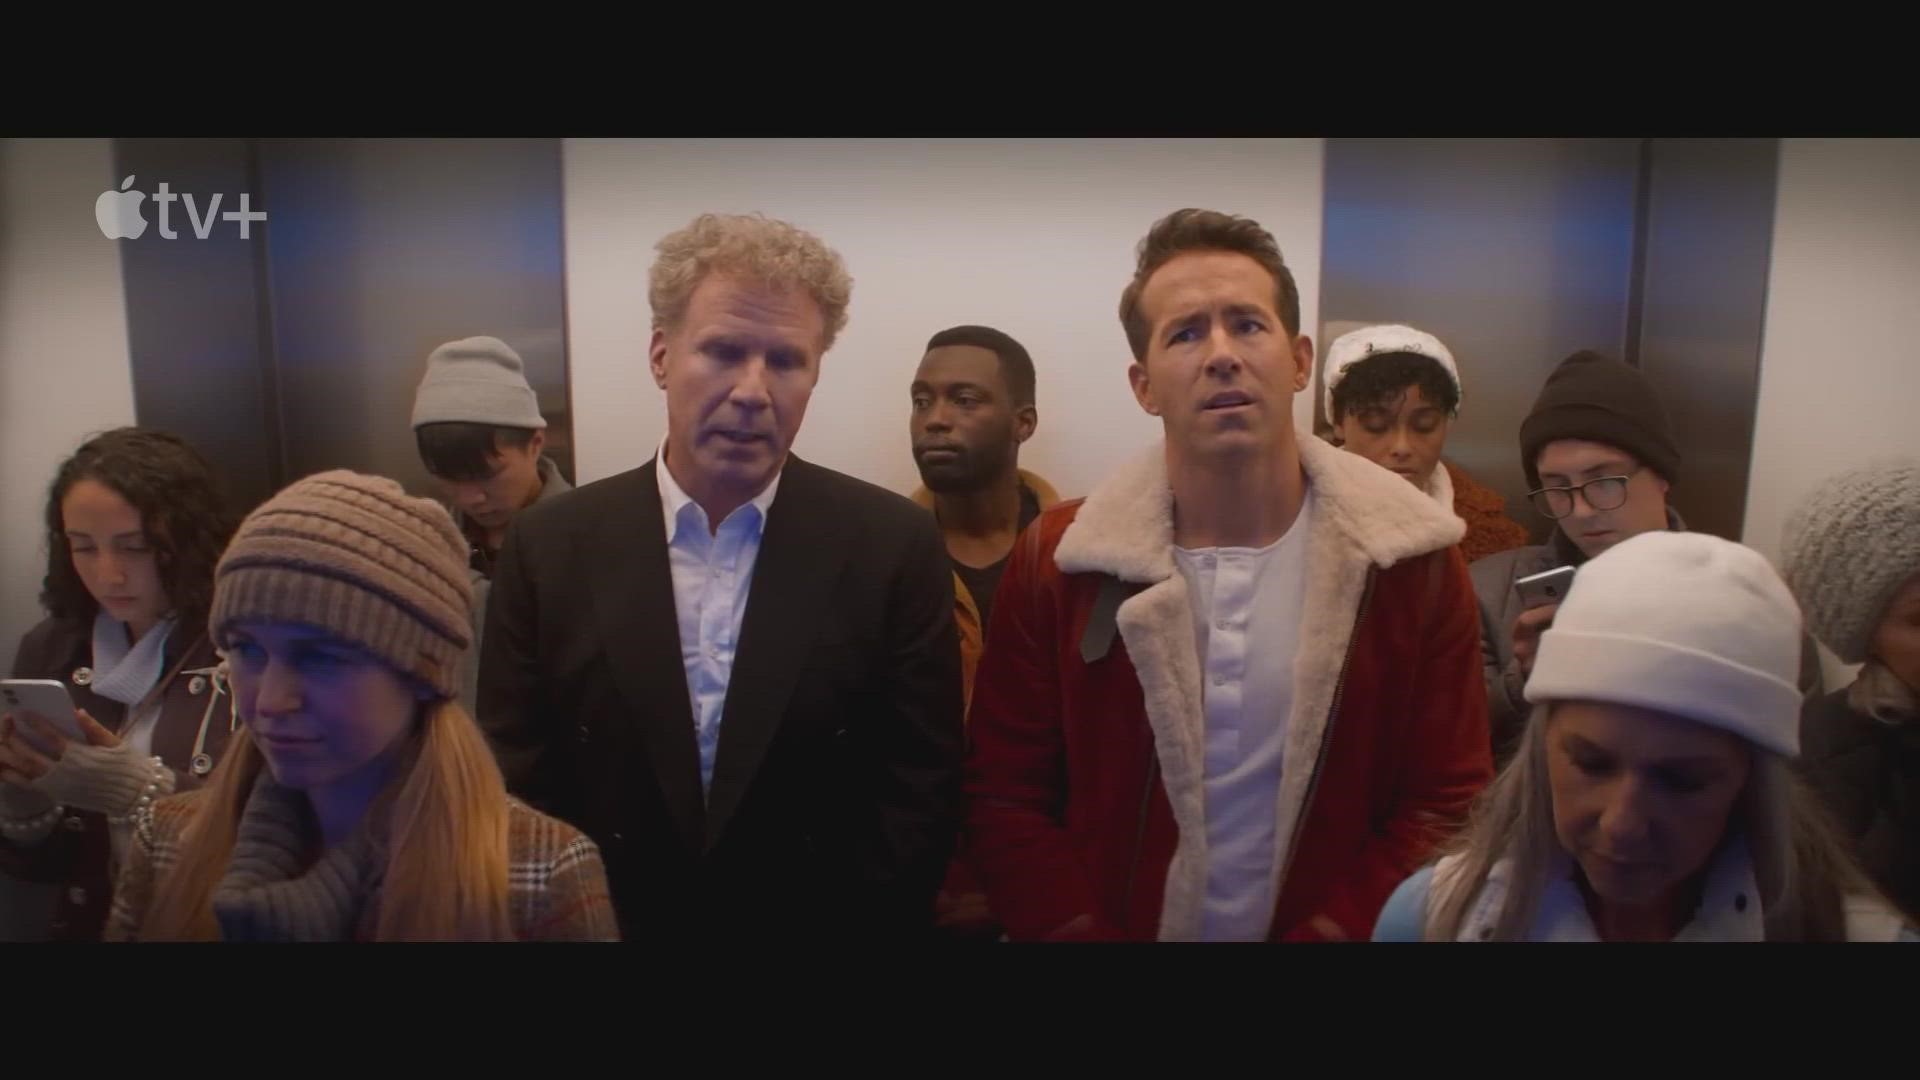 Trailer drop for Christmas movie with Ryan Reynolds, Will Ferrell